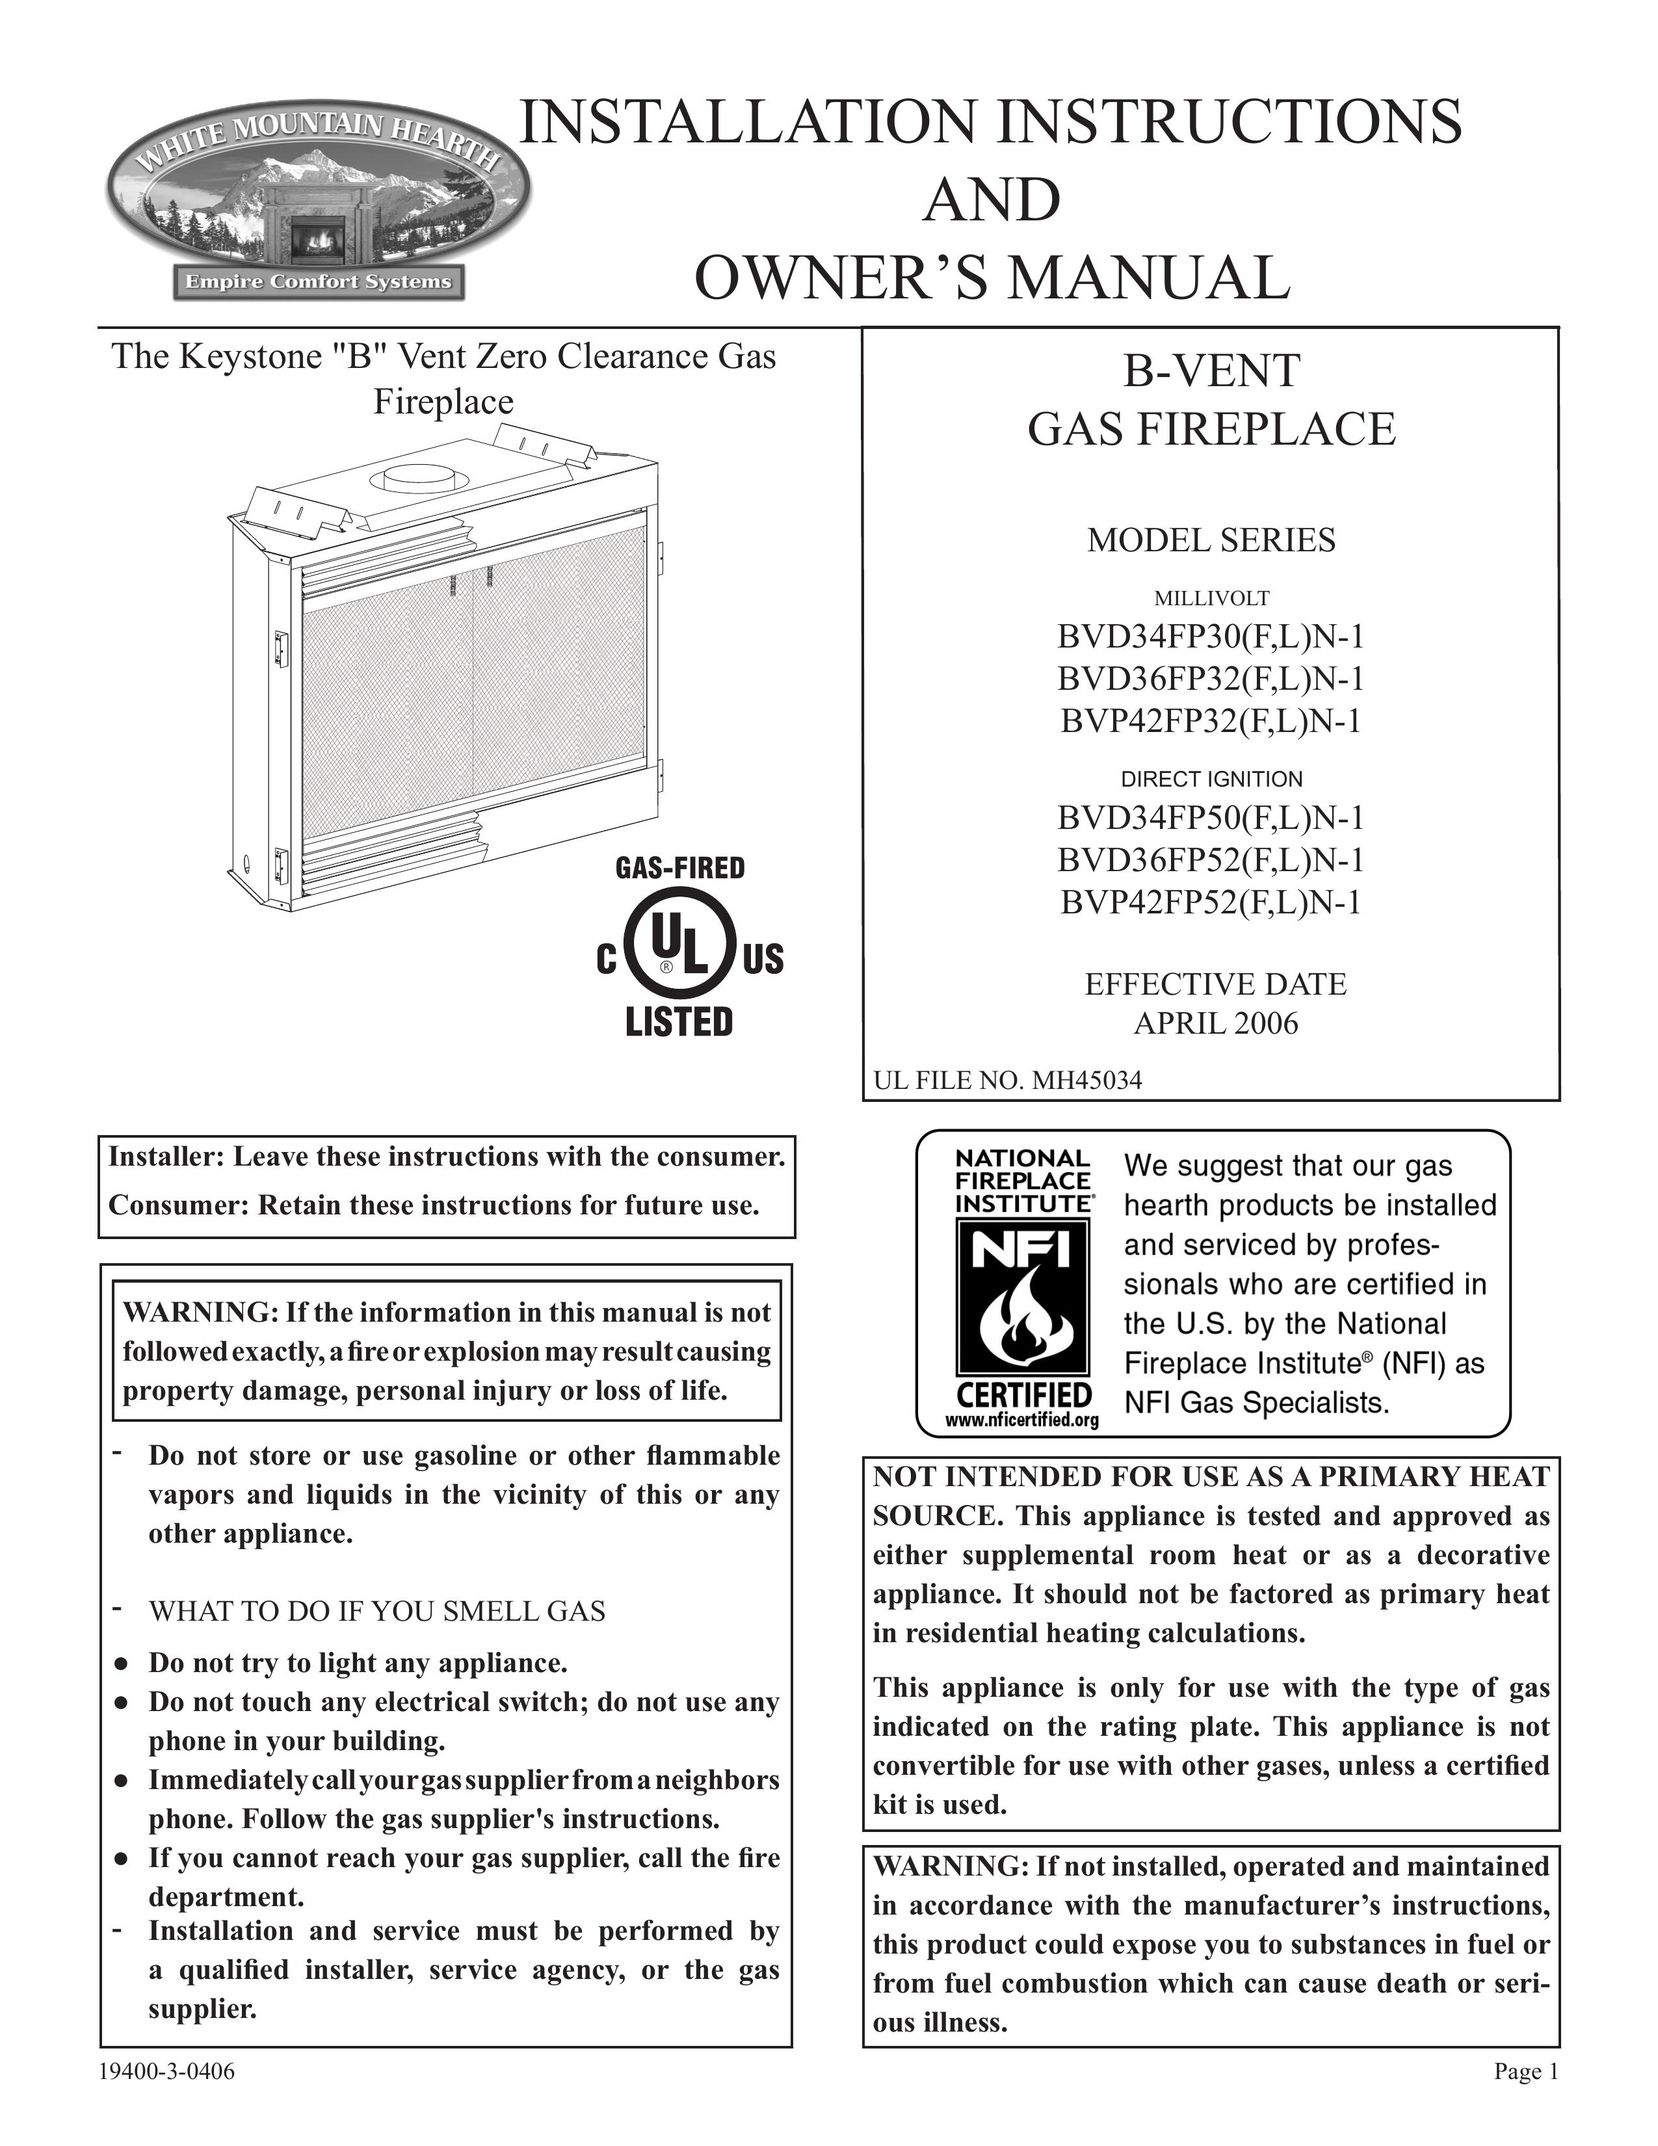 Empire Comfort Systems BVD36FP52 Indoor Fireplace User Manual